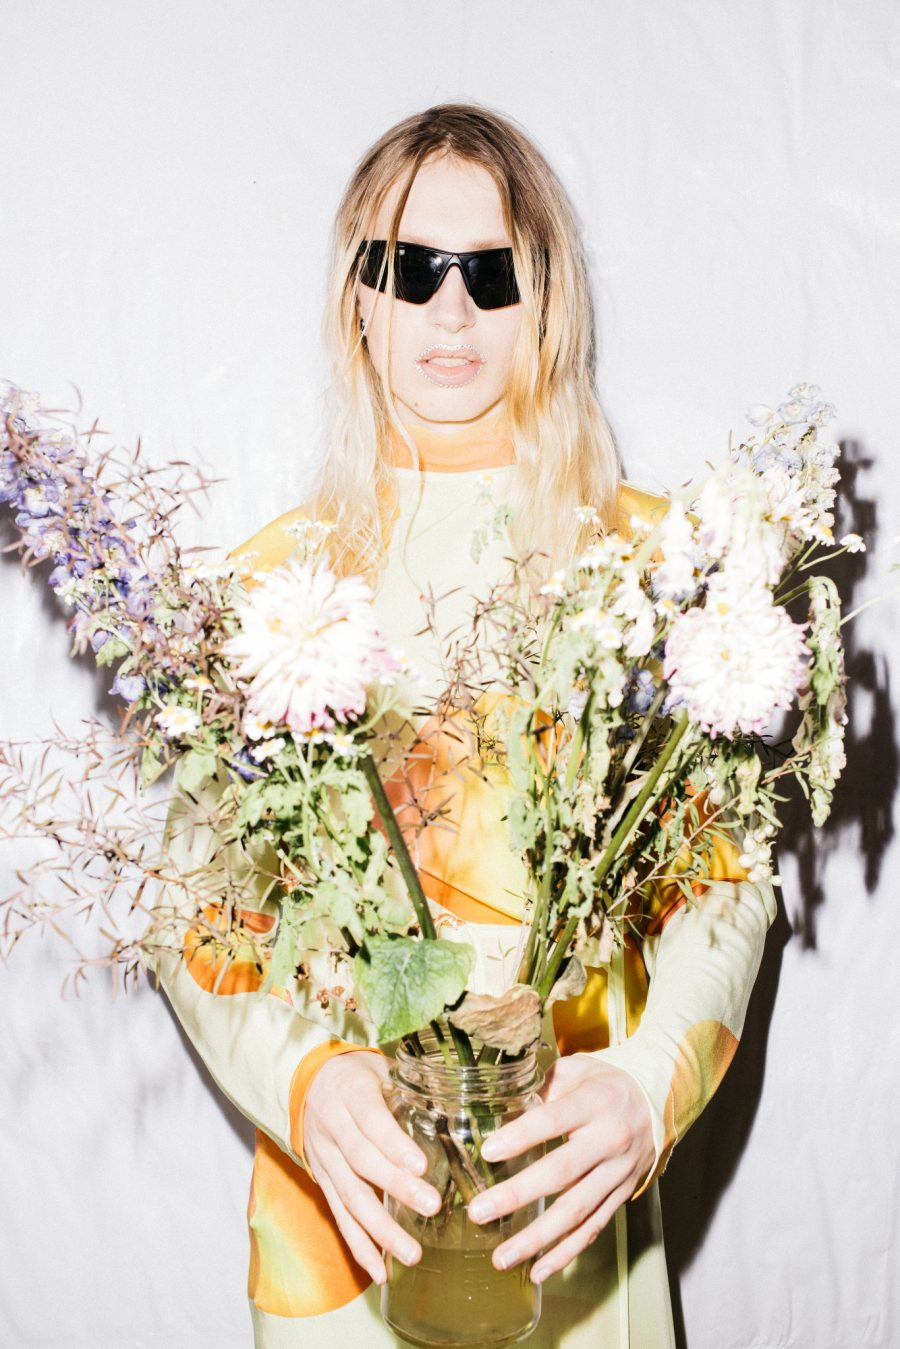 A person wearing sunglasses and an orange dress. They're holding flowers.